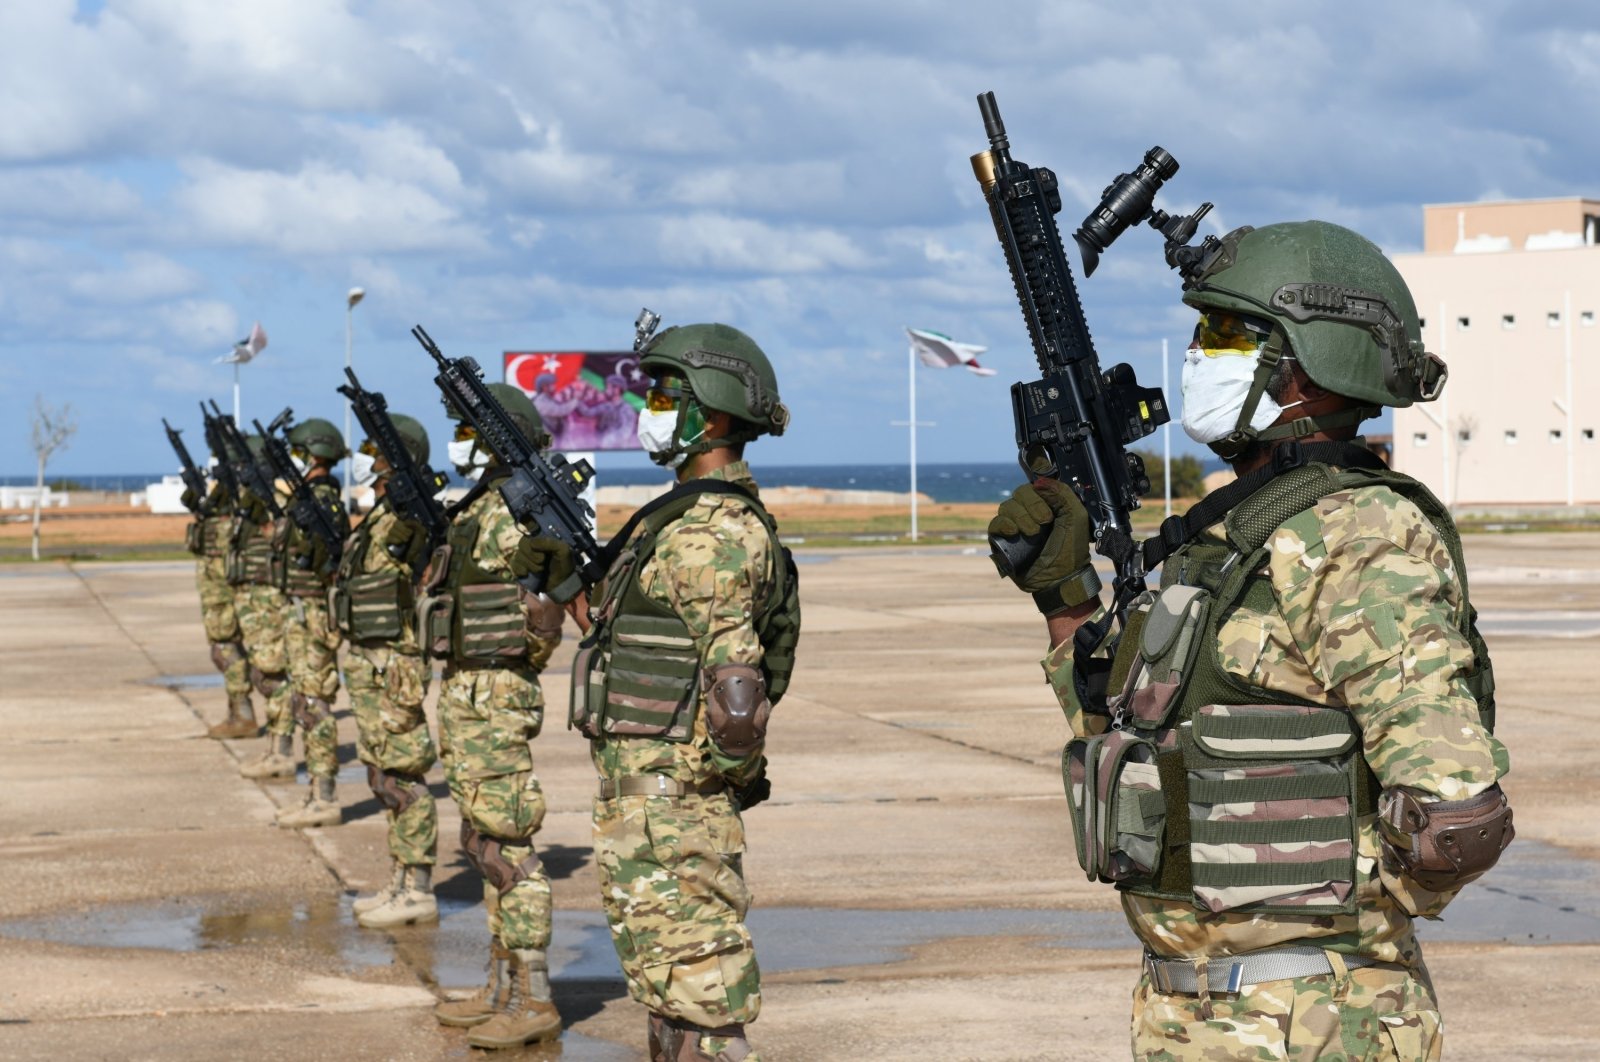 "Turkish forces, the Wagner group in Libya can not be